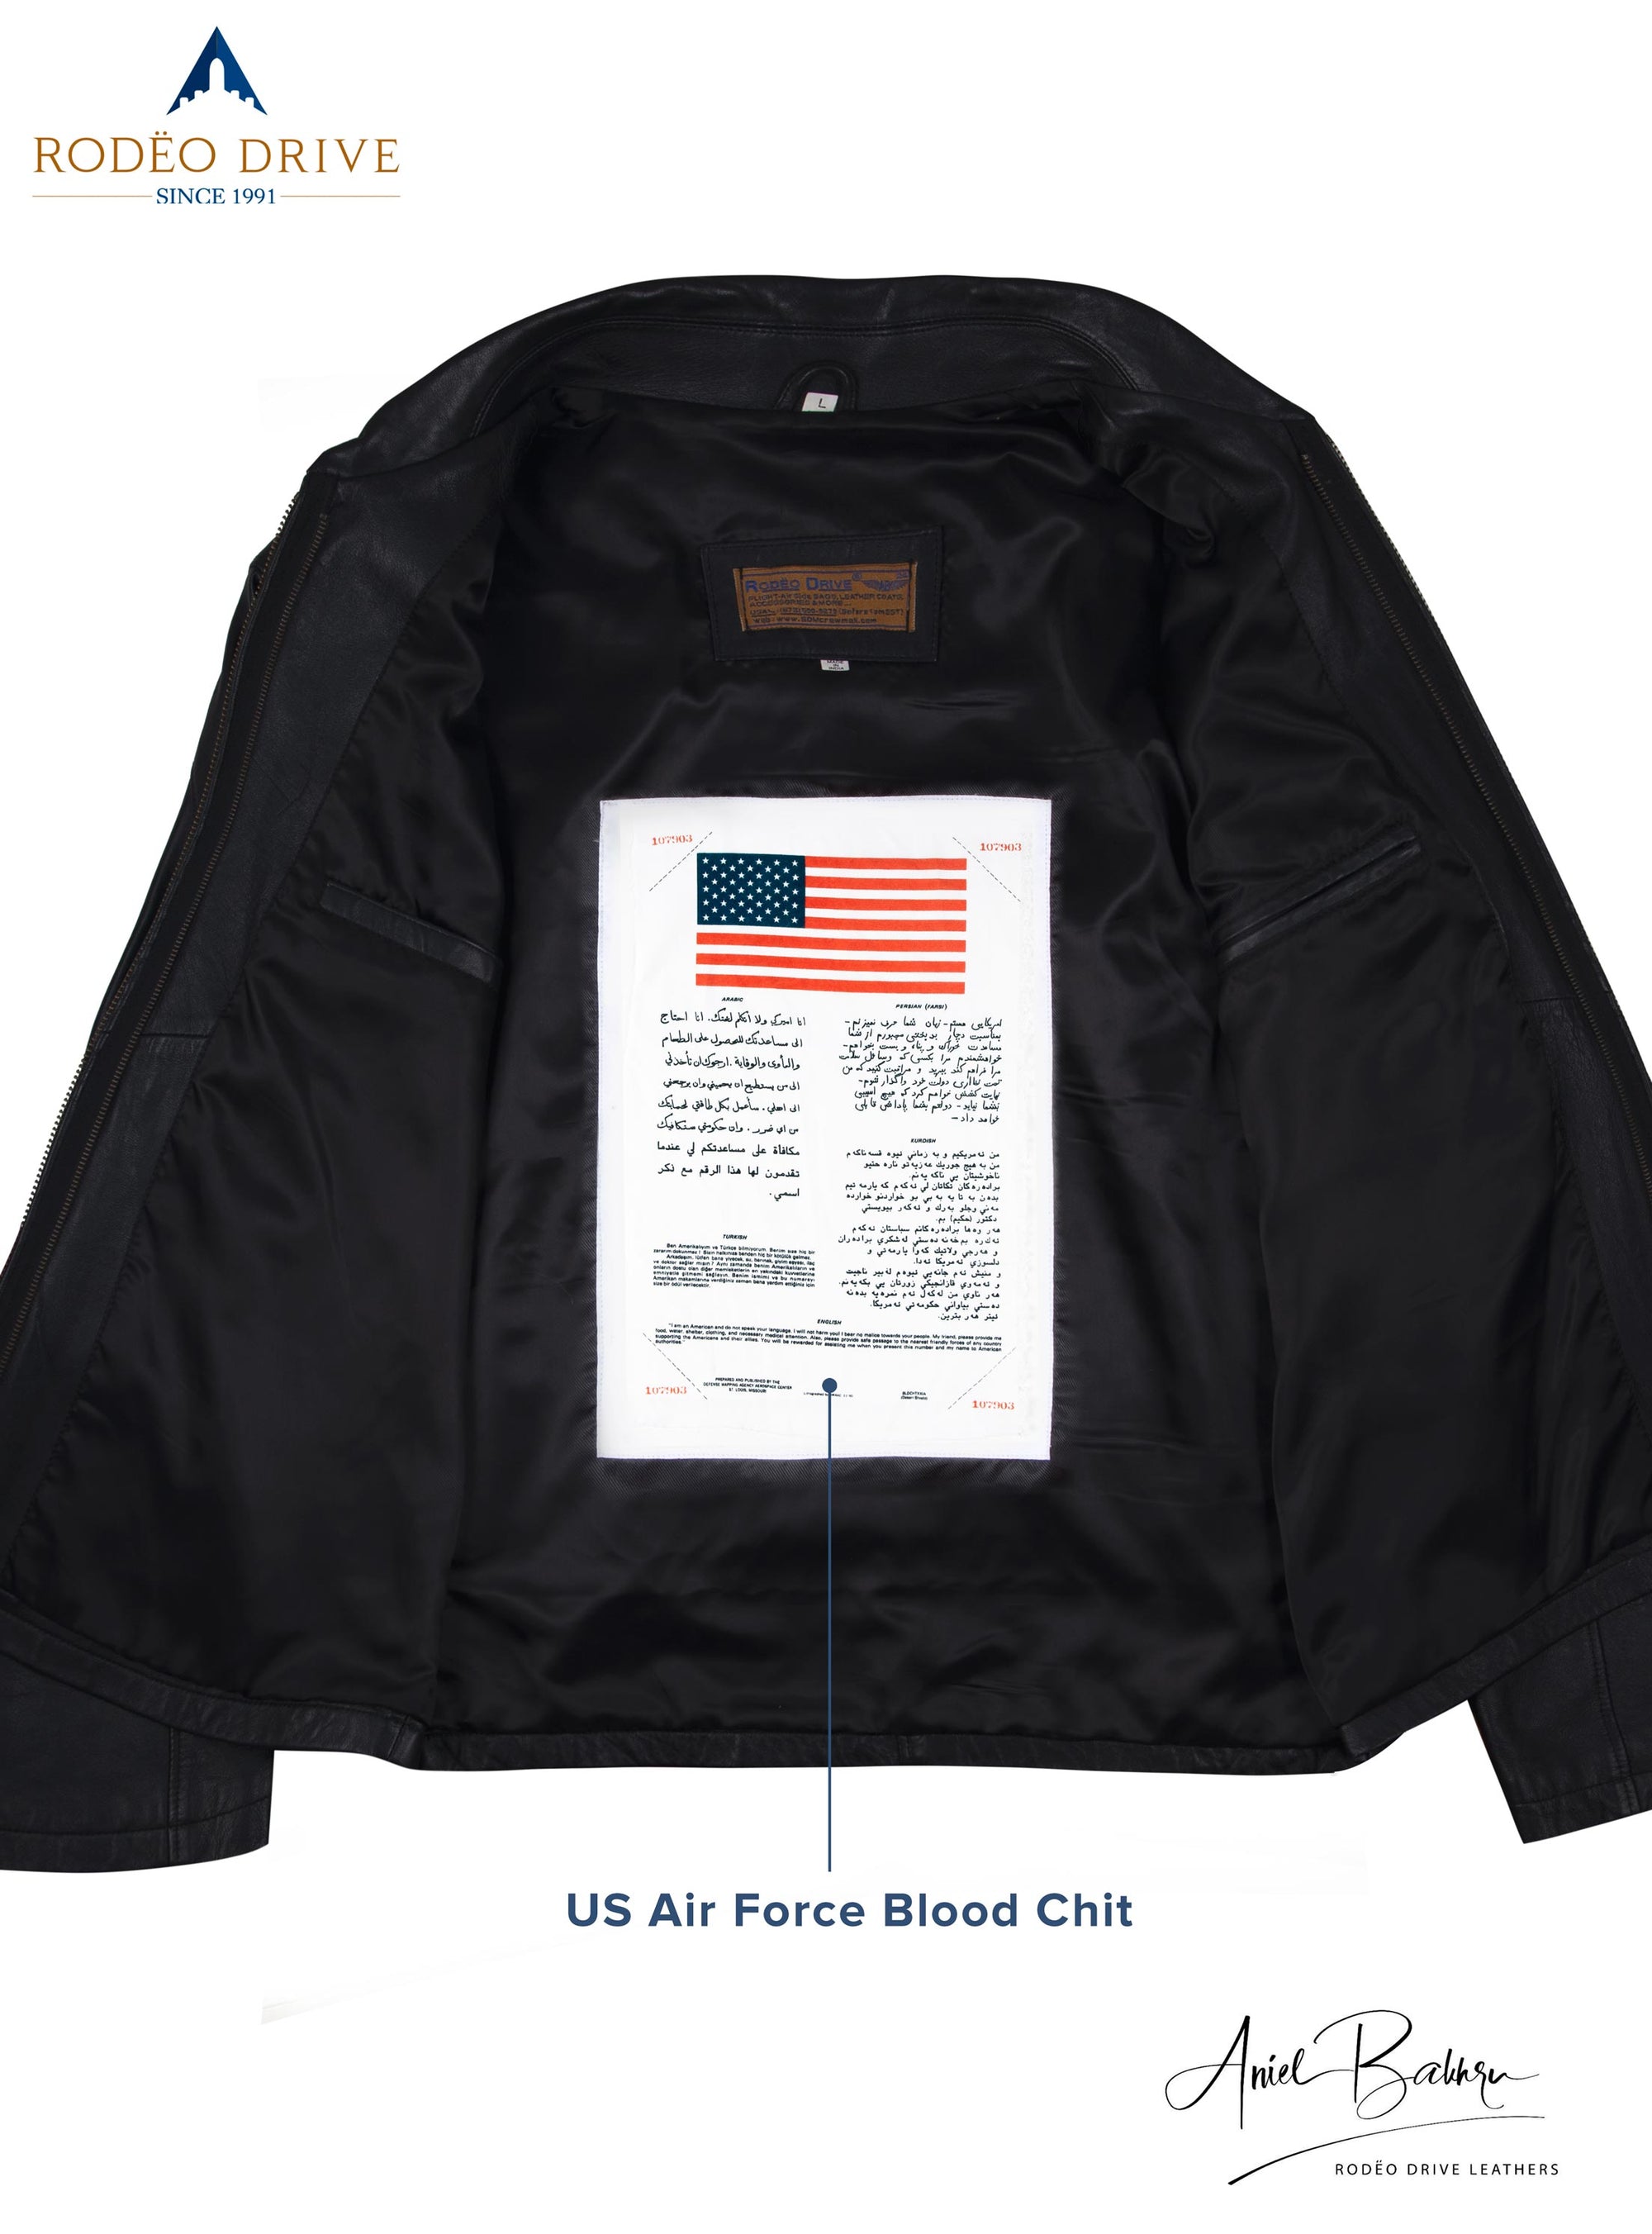 inside image of black leather jacket. A US Air Force Blood chit is sewed inside it